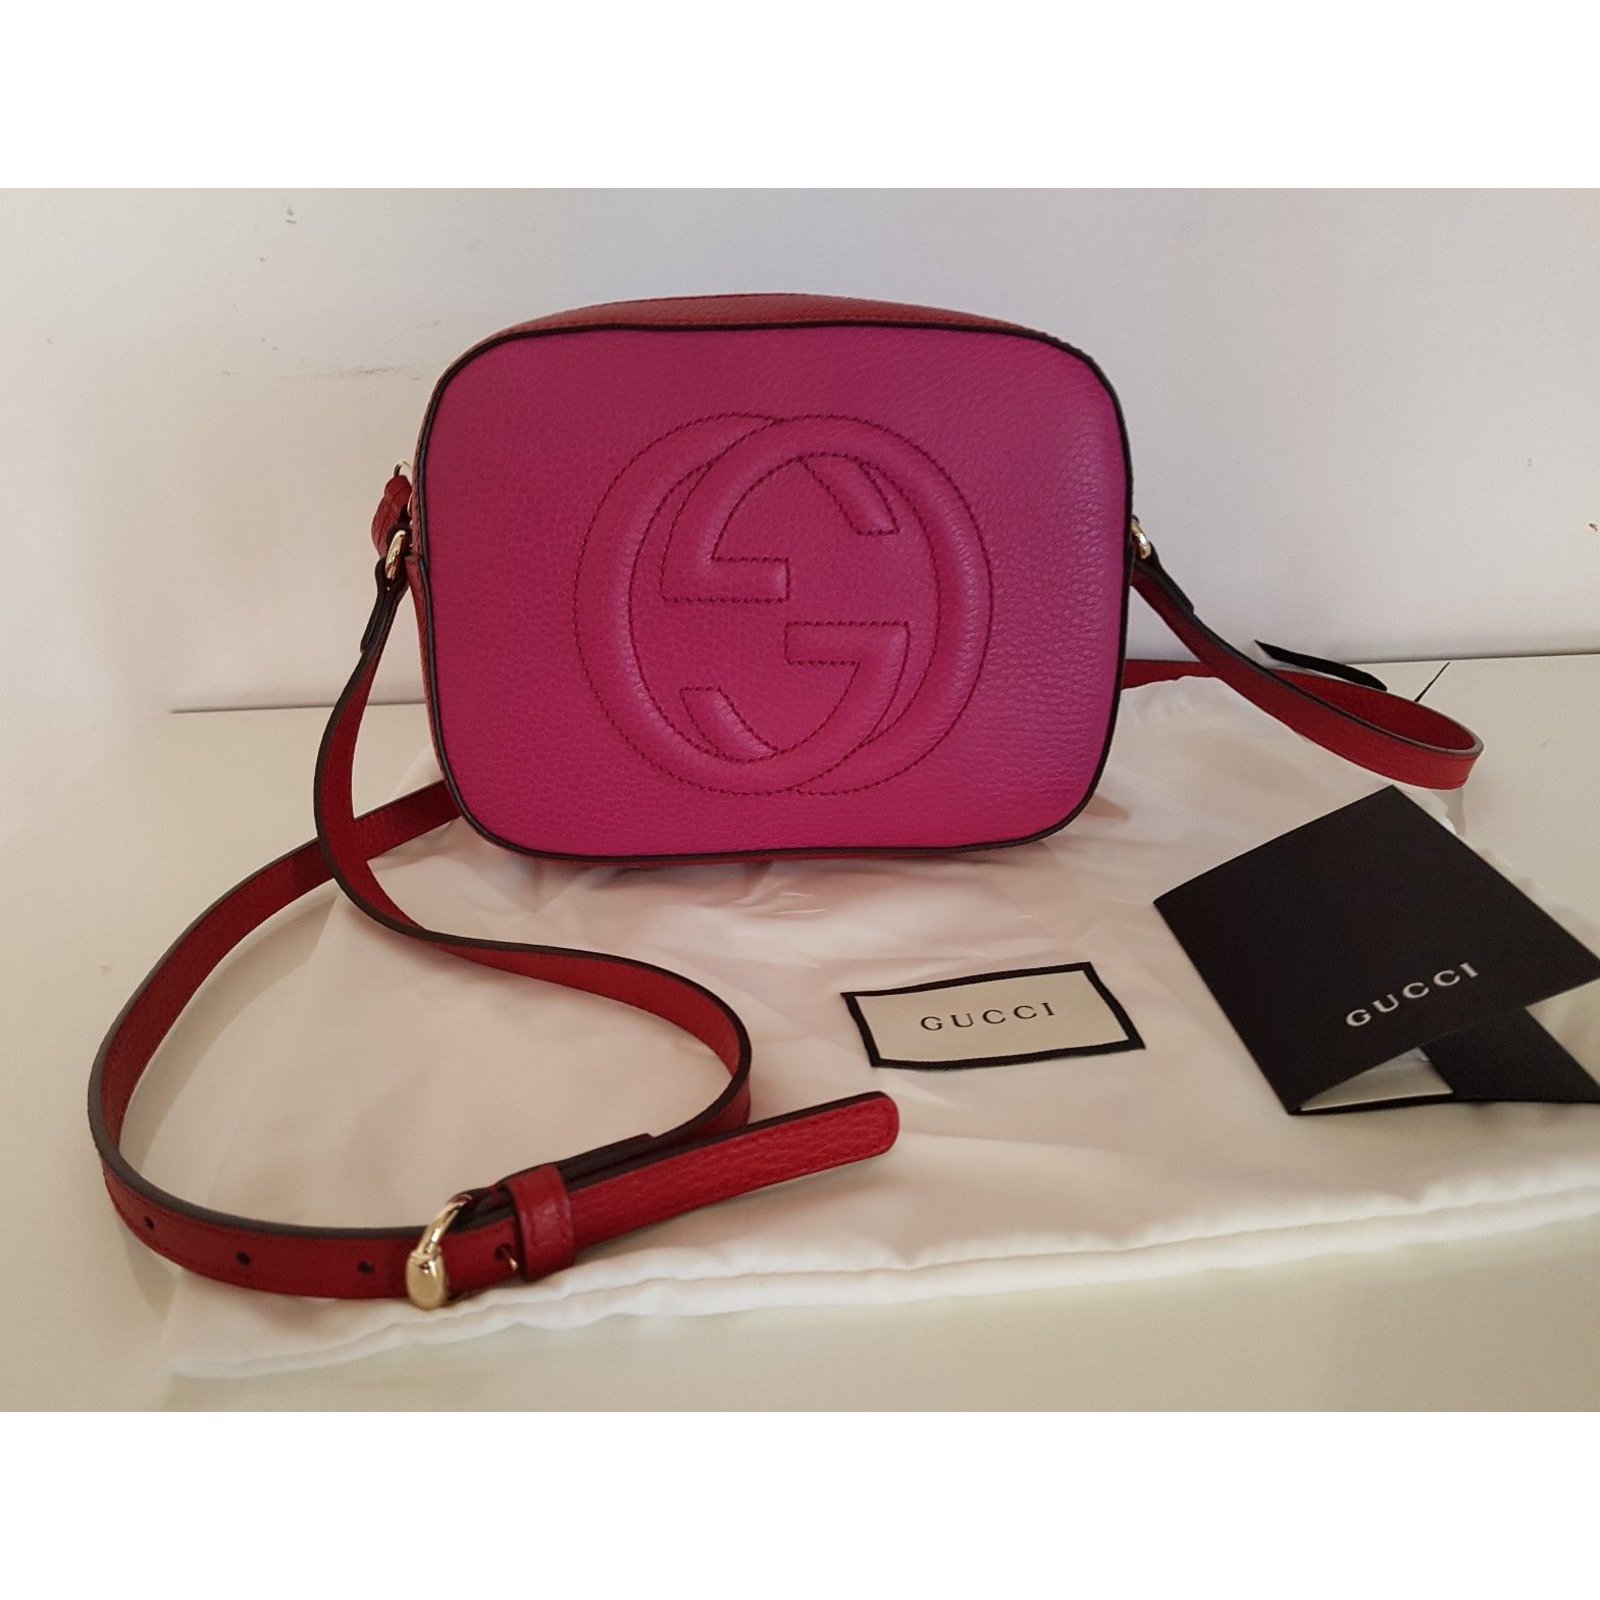 Gucci gucci disco bag soho double color red /fucsia new no used with receipt Handbags Leather ...